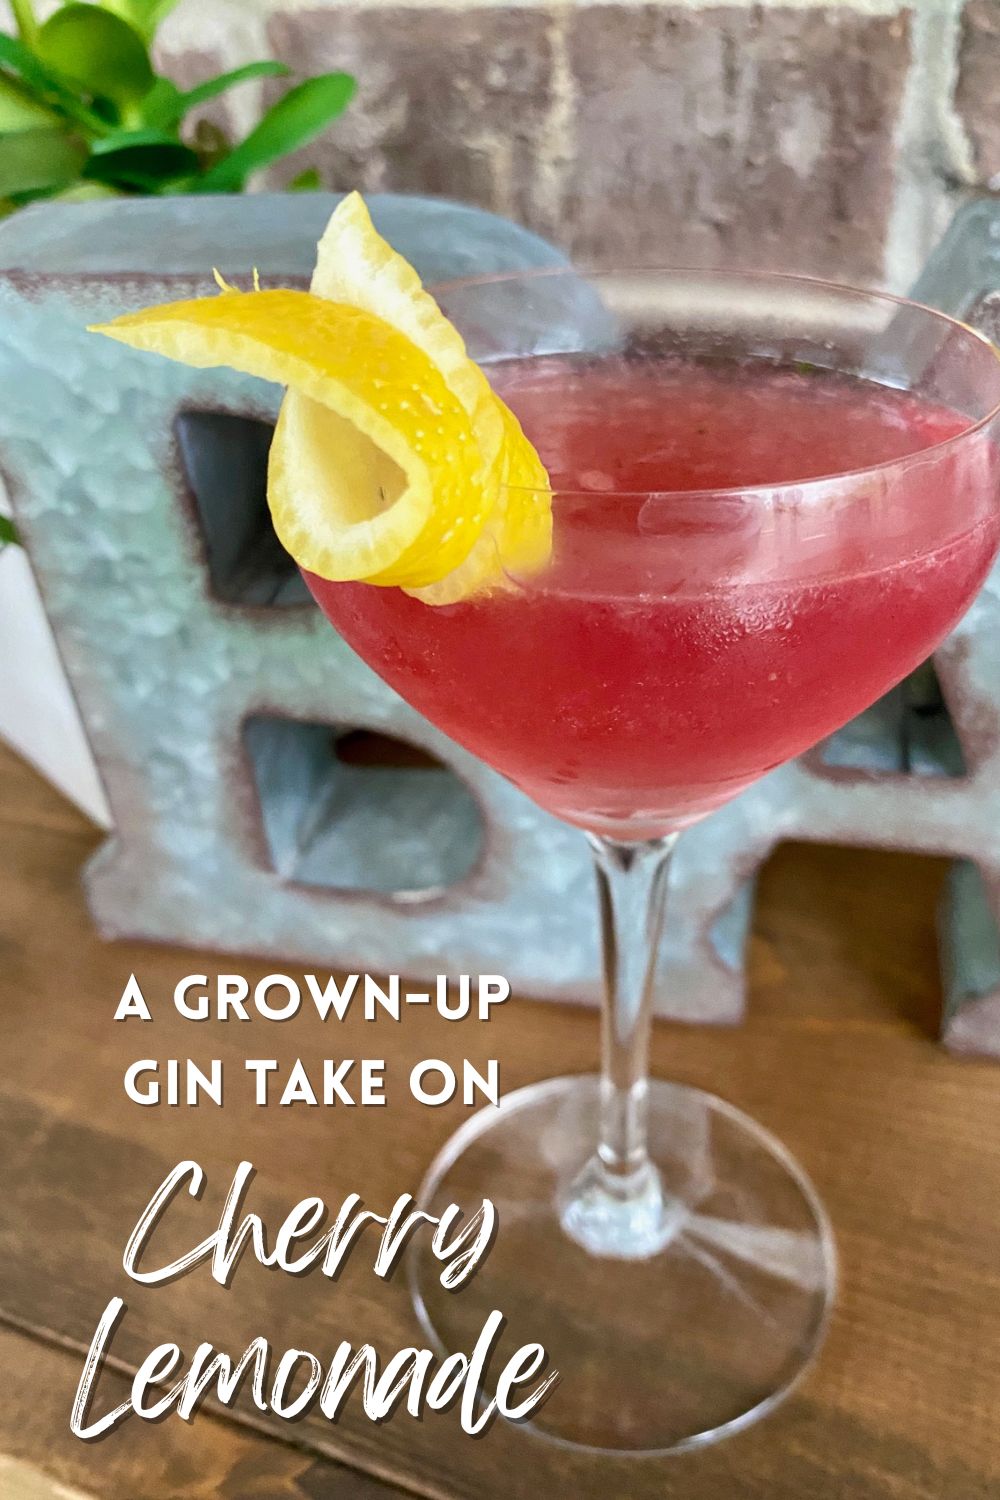 Cherry & Lemon Gin Cocktail a.k.a. Grown-Up Cherry Lemonade | This delicious take on hard cherry lemonade is delicious & refreshing, made with a secret ingredient (Luxardo Sangue Morlacco...I'm obsessed!). An easy summer cocktail, easy cocktail recipe, how to make cherry lemonade for adults. #cocktailrecipe #cherry #lemonade #hardlemonade